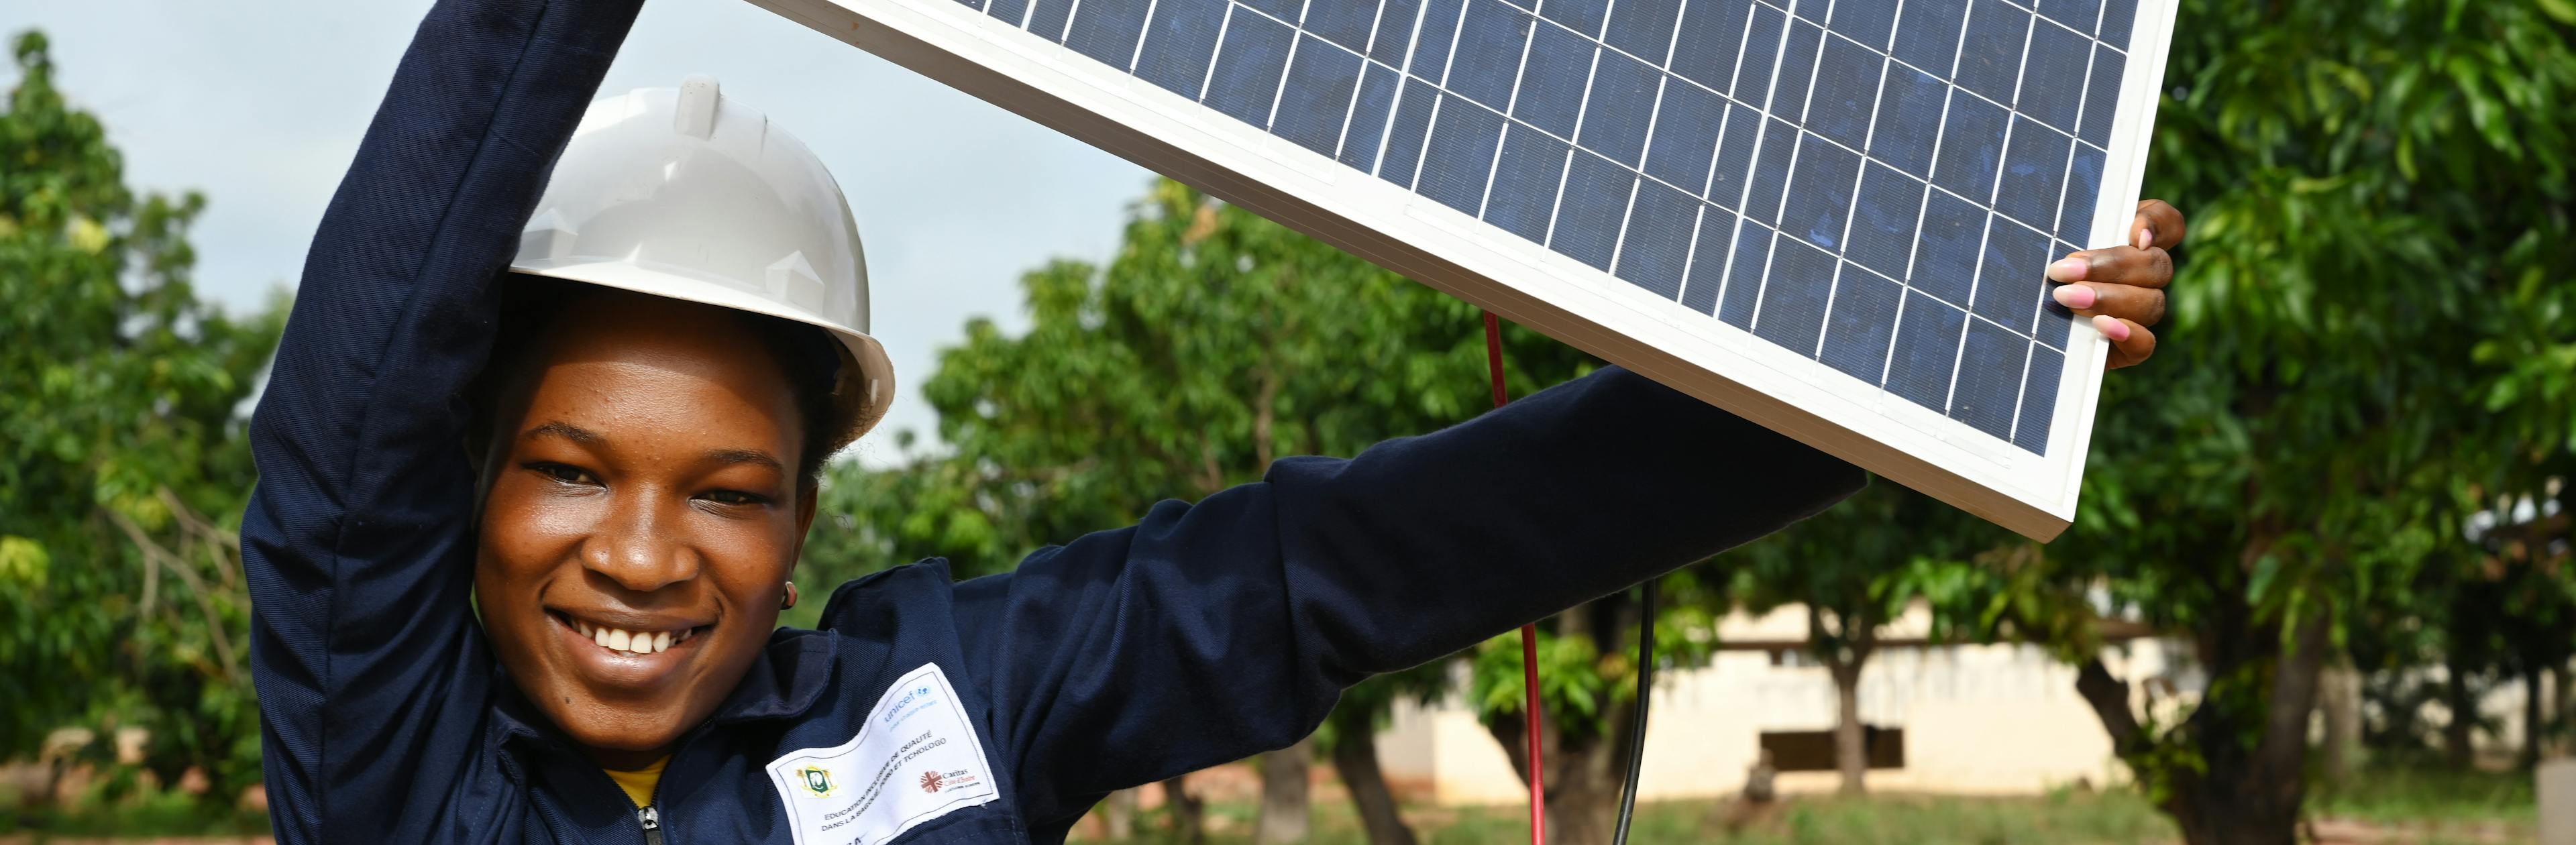 Sara Sekongo, a 16 year old girl, is taking a solar energy course at the professional high school of Korhogo, in the North of Cote d’Ivoire.